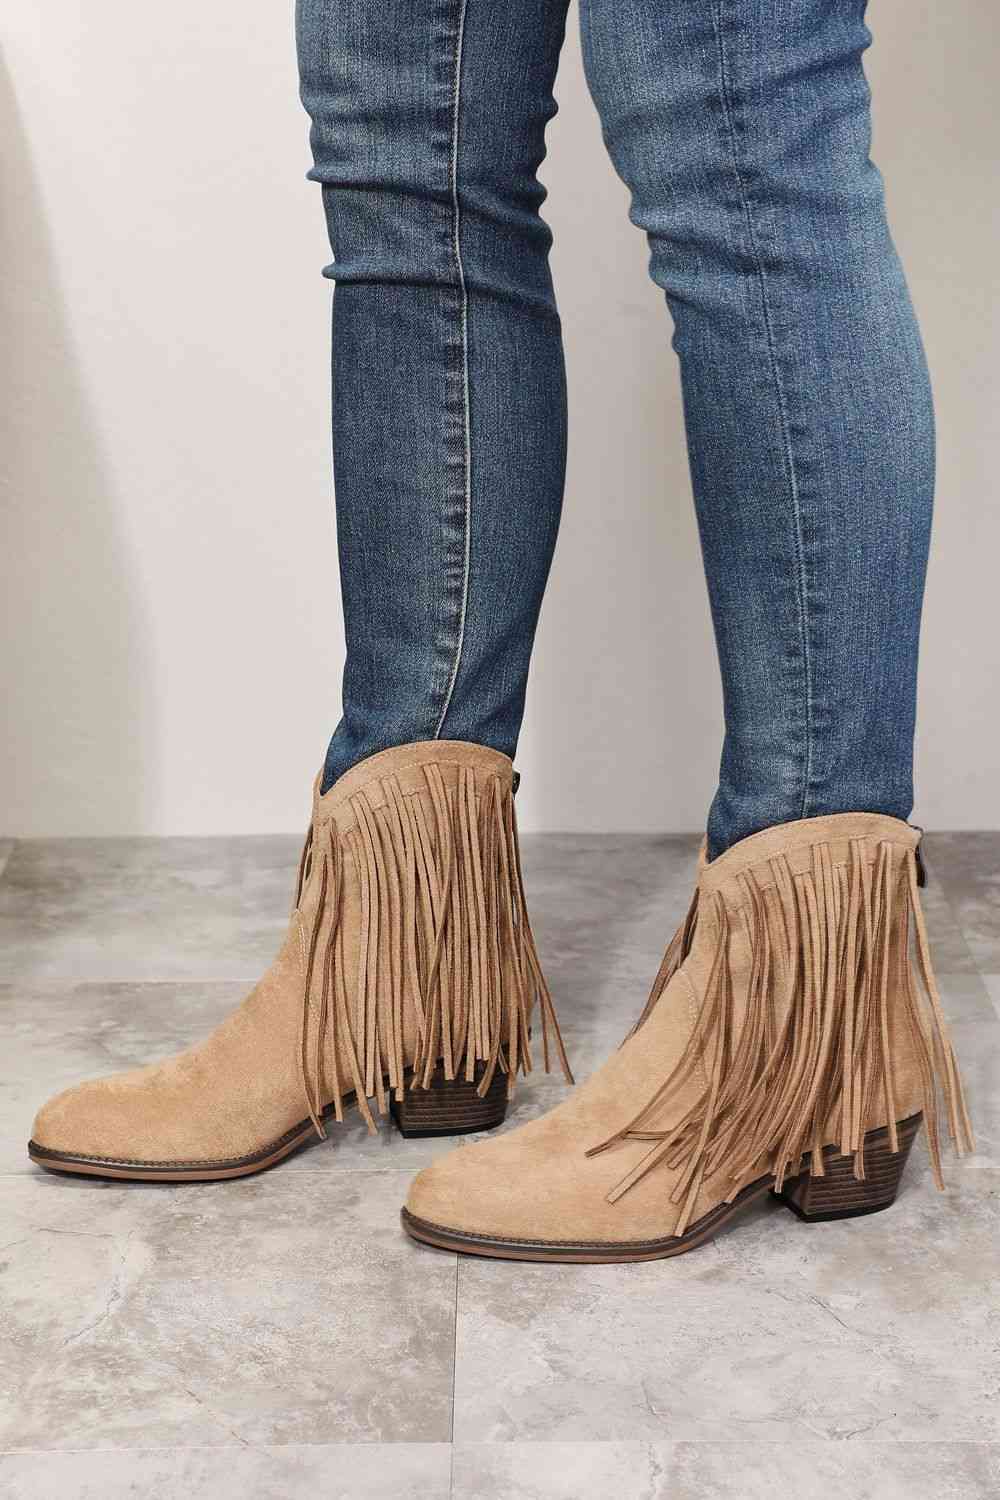 A person standing in beige Trendsi Legend Women's Fringe Cowboy Western Ankle Boots with long fringe details, paired with blue skinny jeans, against a grey tiled floor and white wall background.